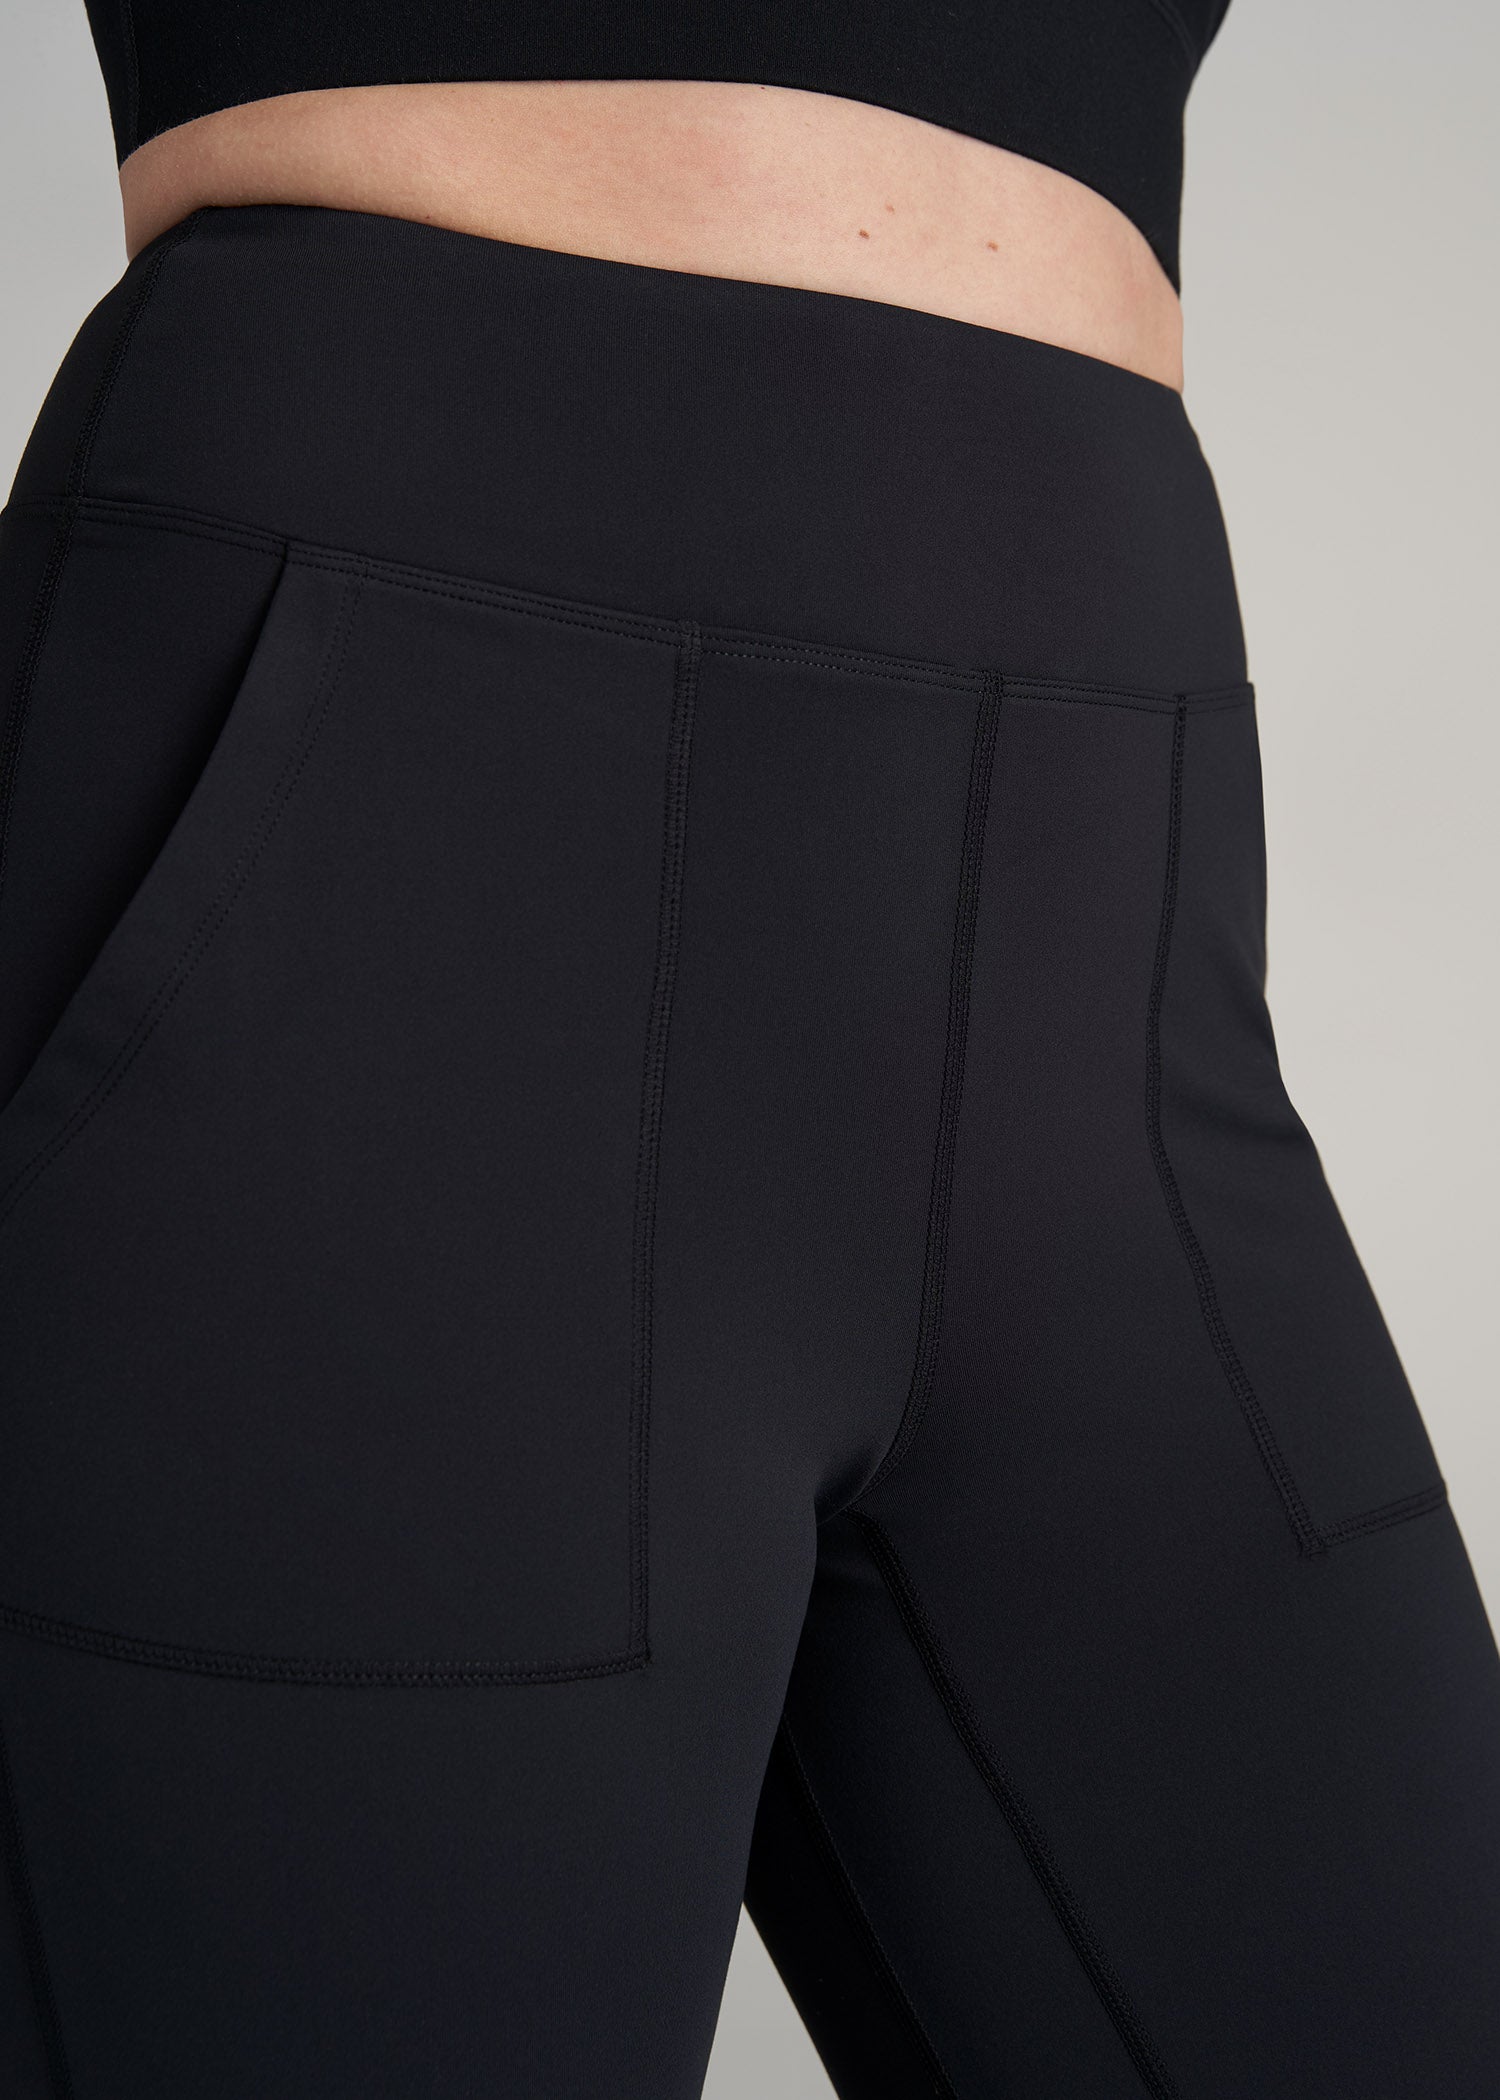 Balance Pocket Joggers for Tall Women in Black